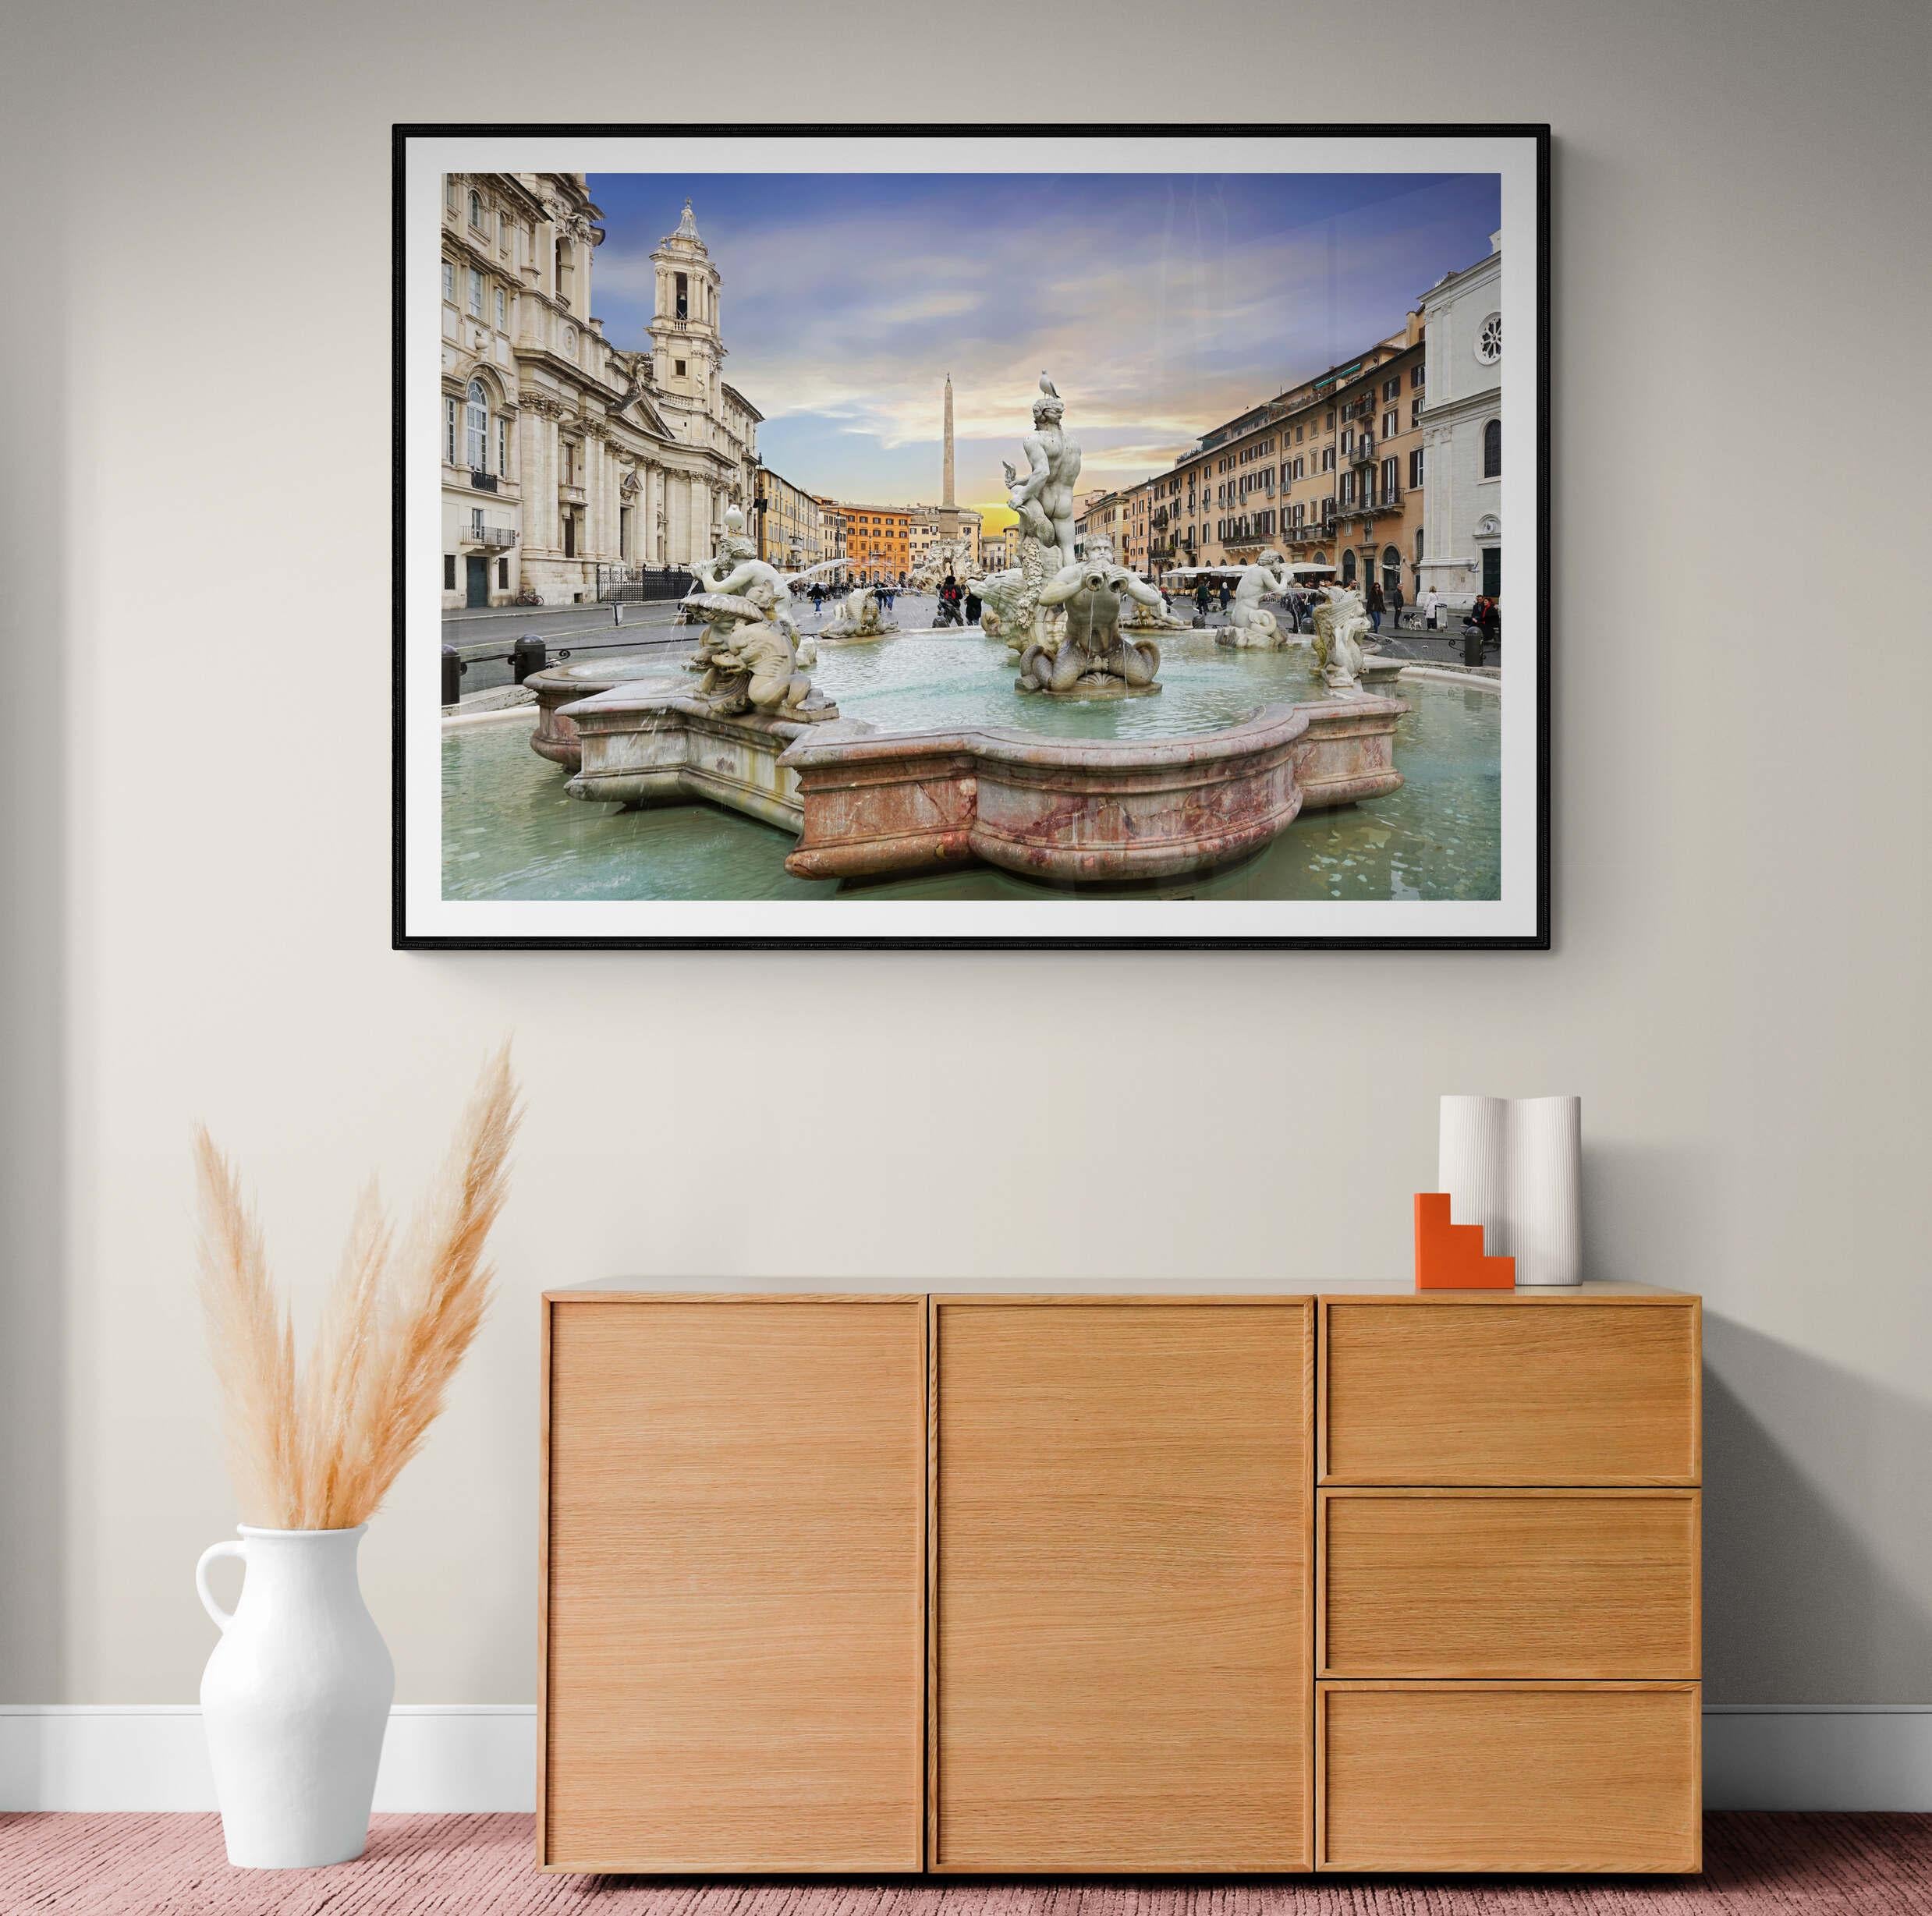 The Piazza Navona, Roma - Italy 2019 - Contemporary Panoramic Color Photography For Sale 2